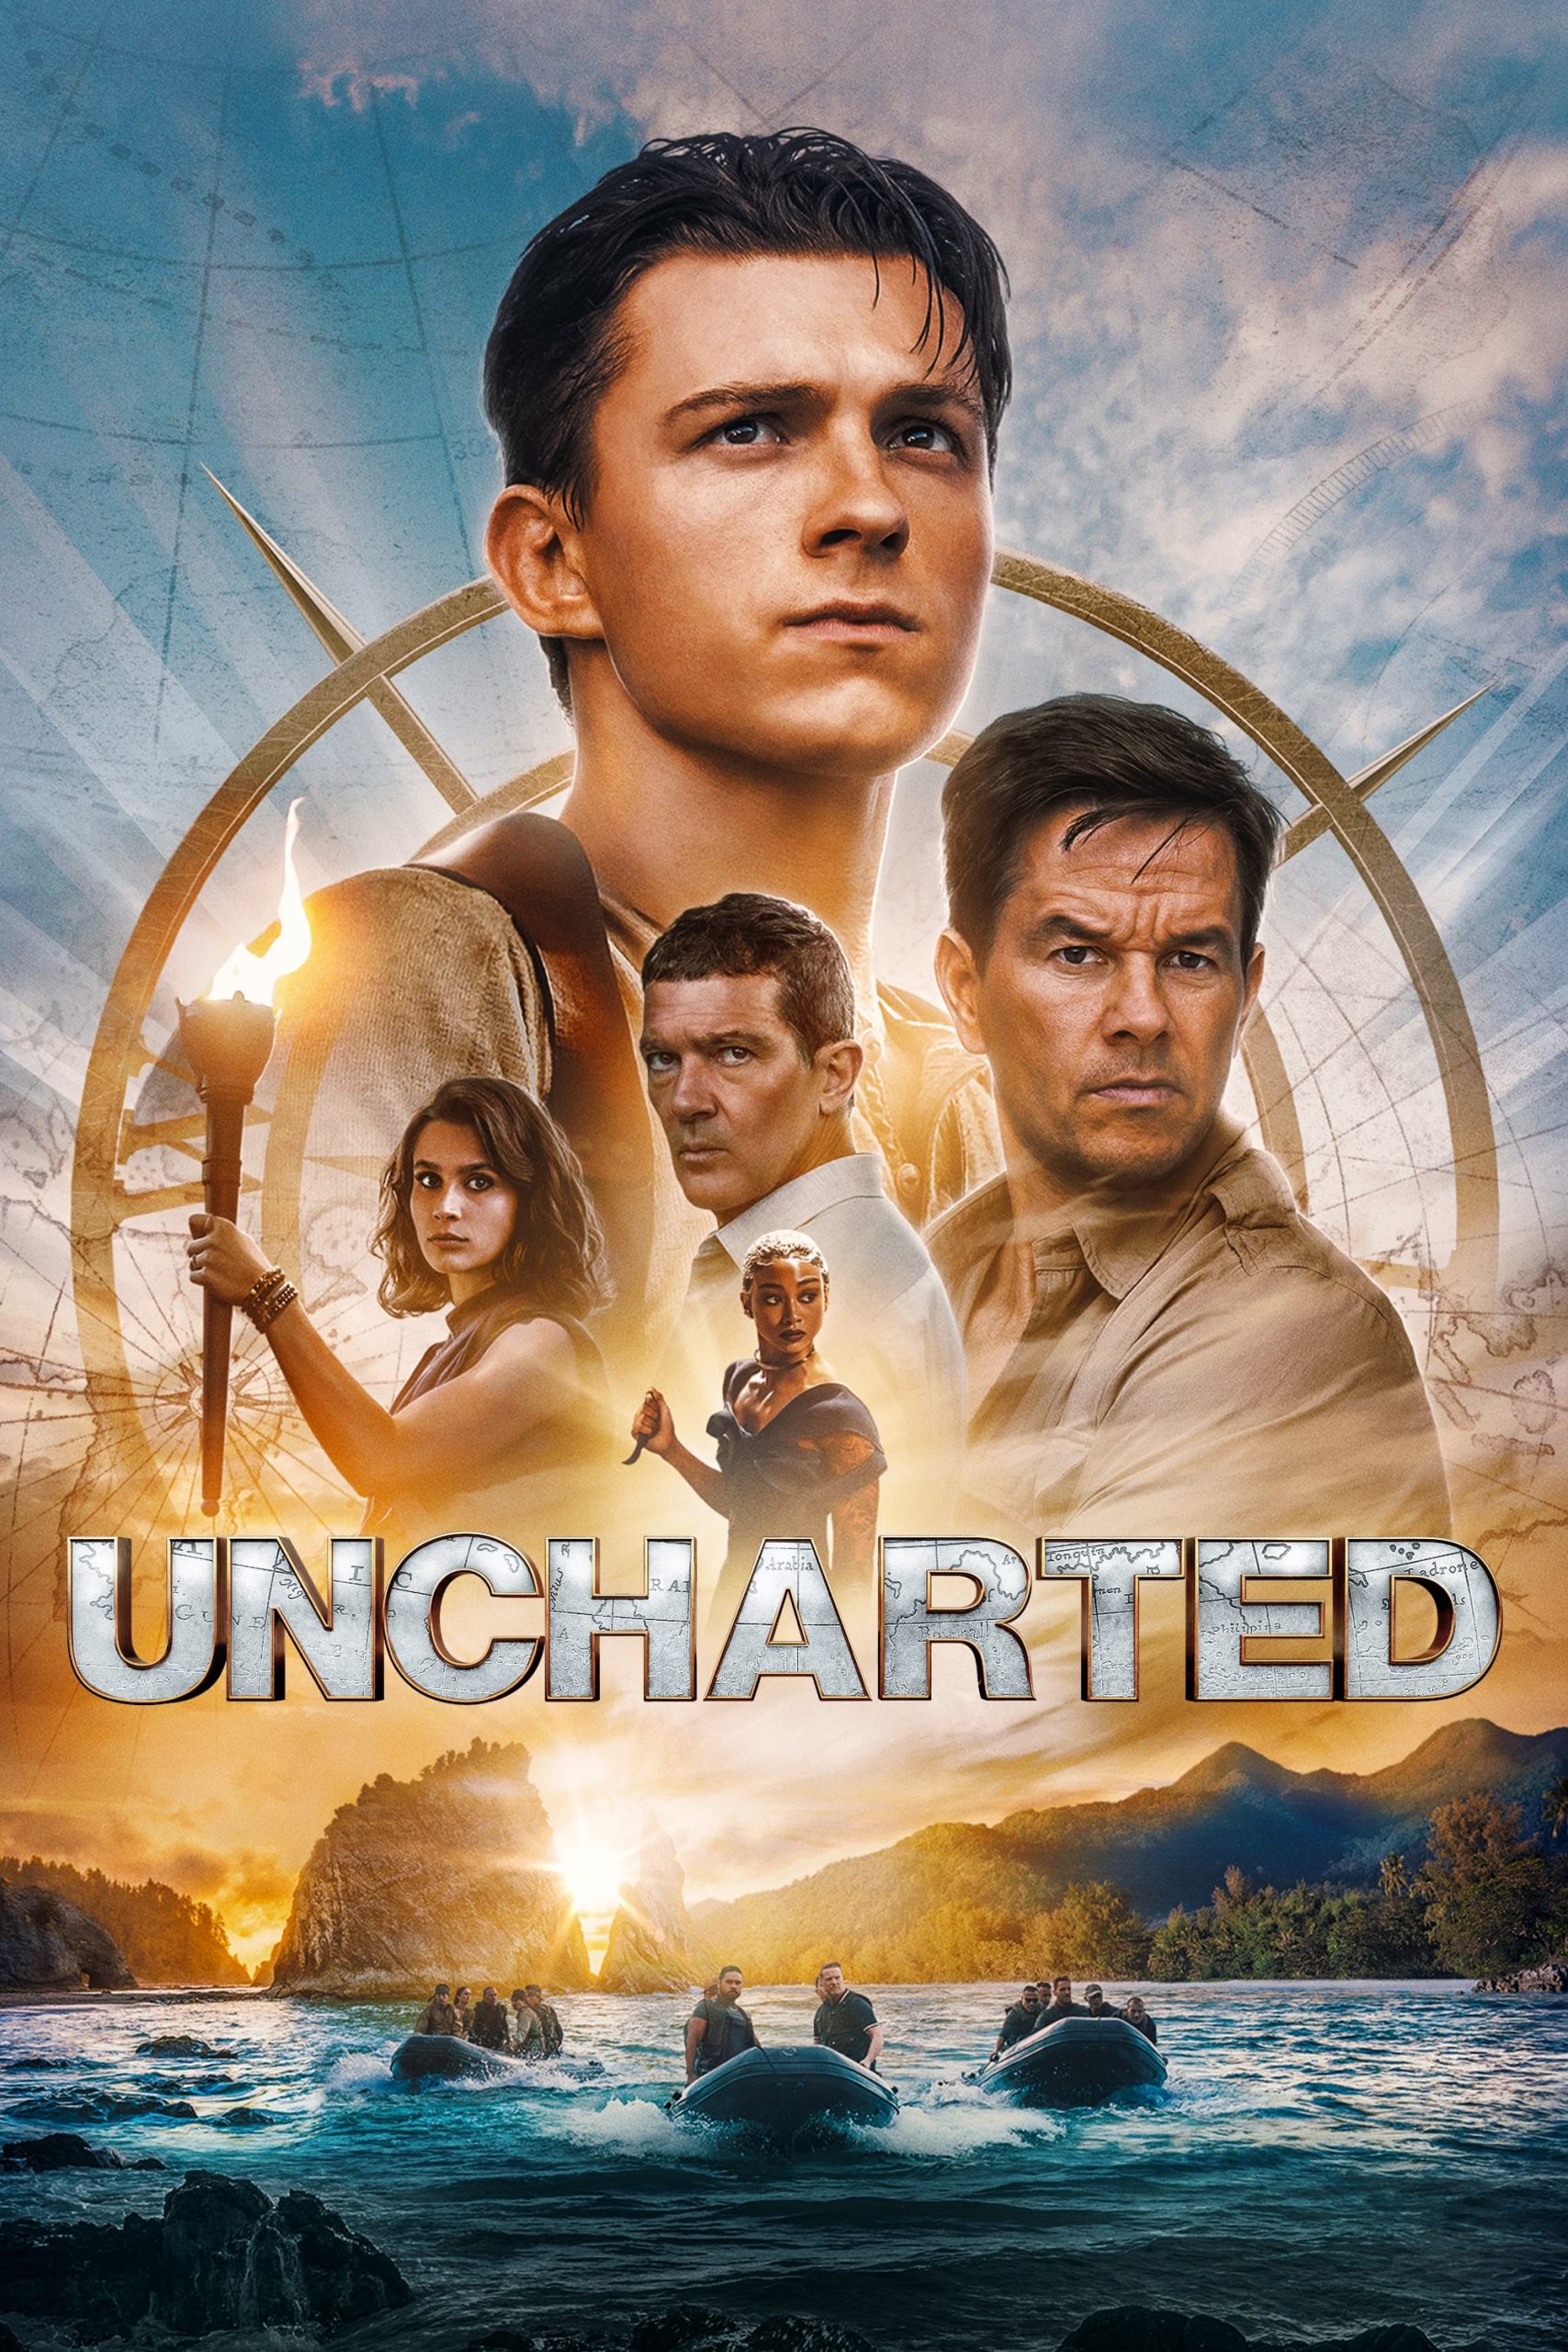 Poster for the movie "Uncharted"